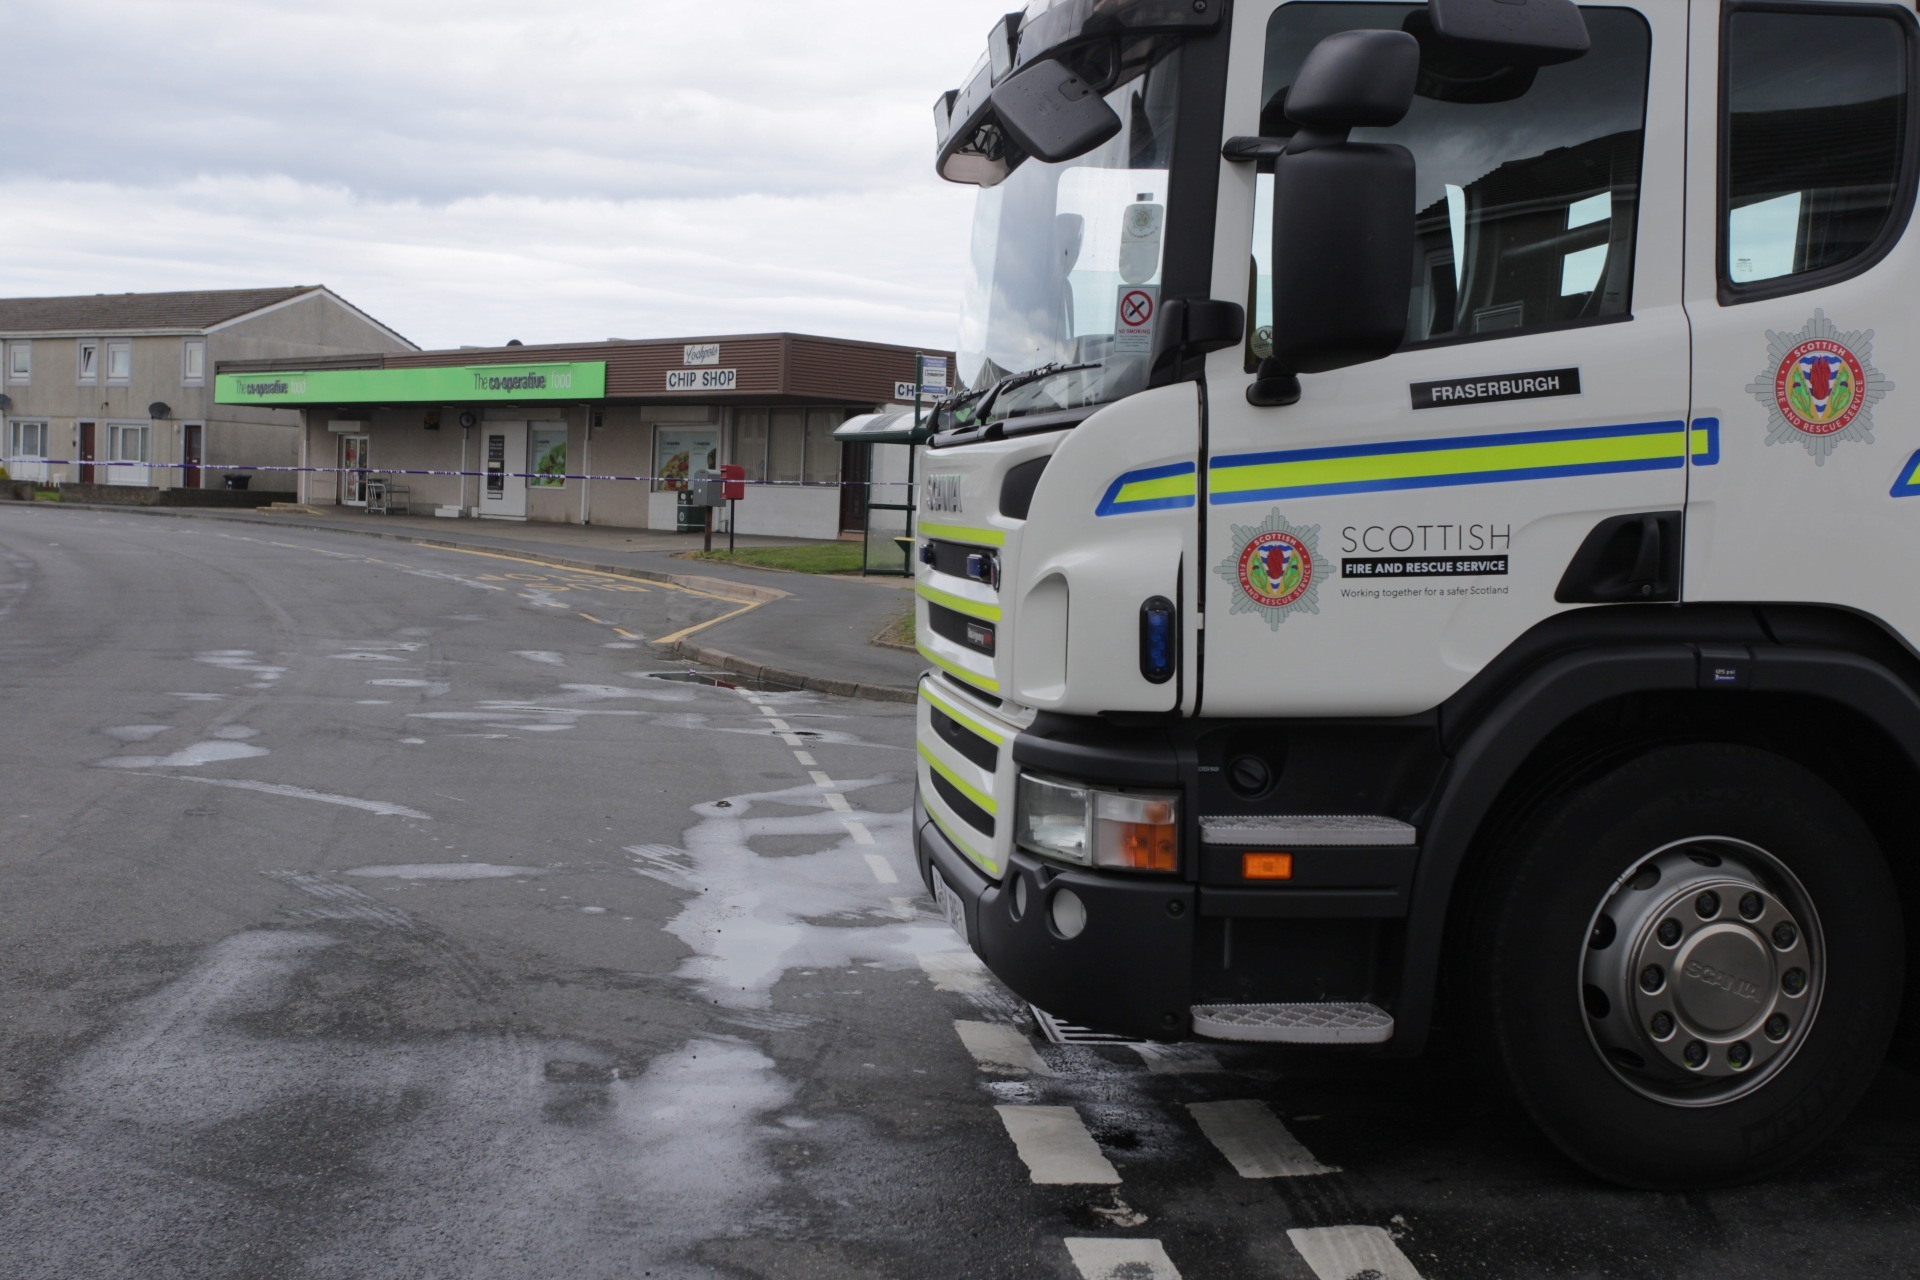 Scene of the incident where a suspicious package found at Fraserburgh Coop